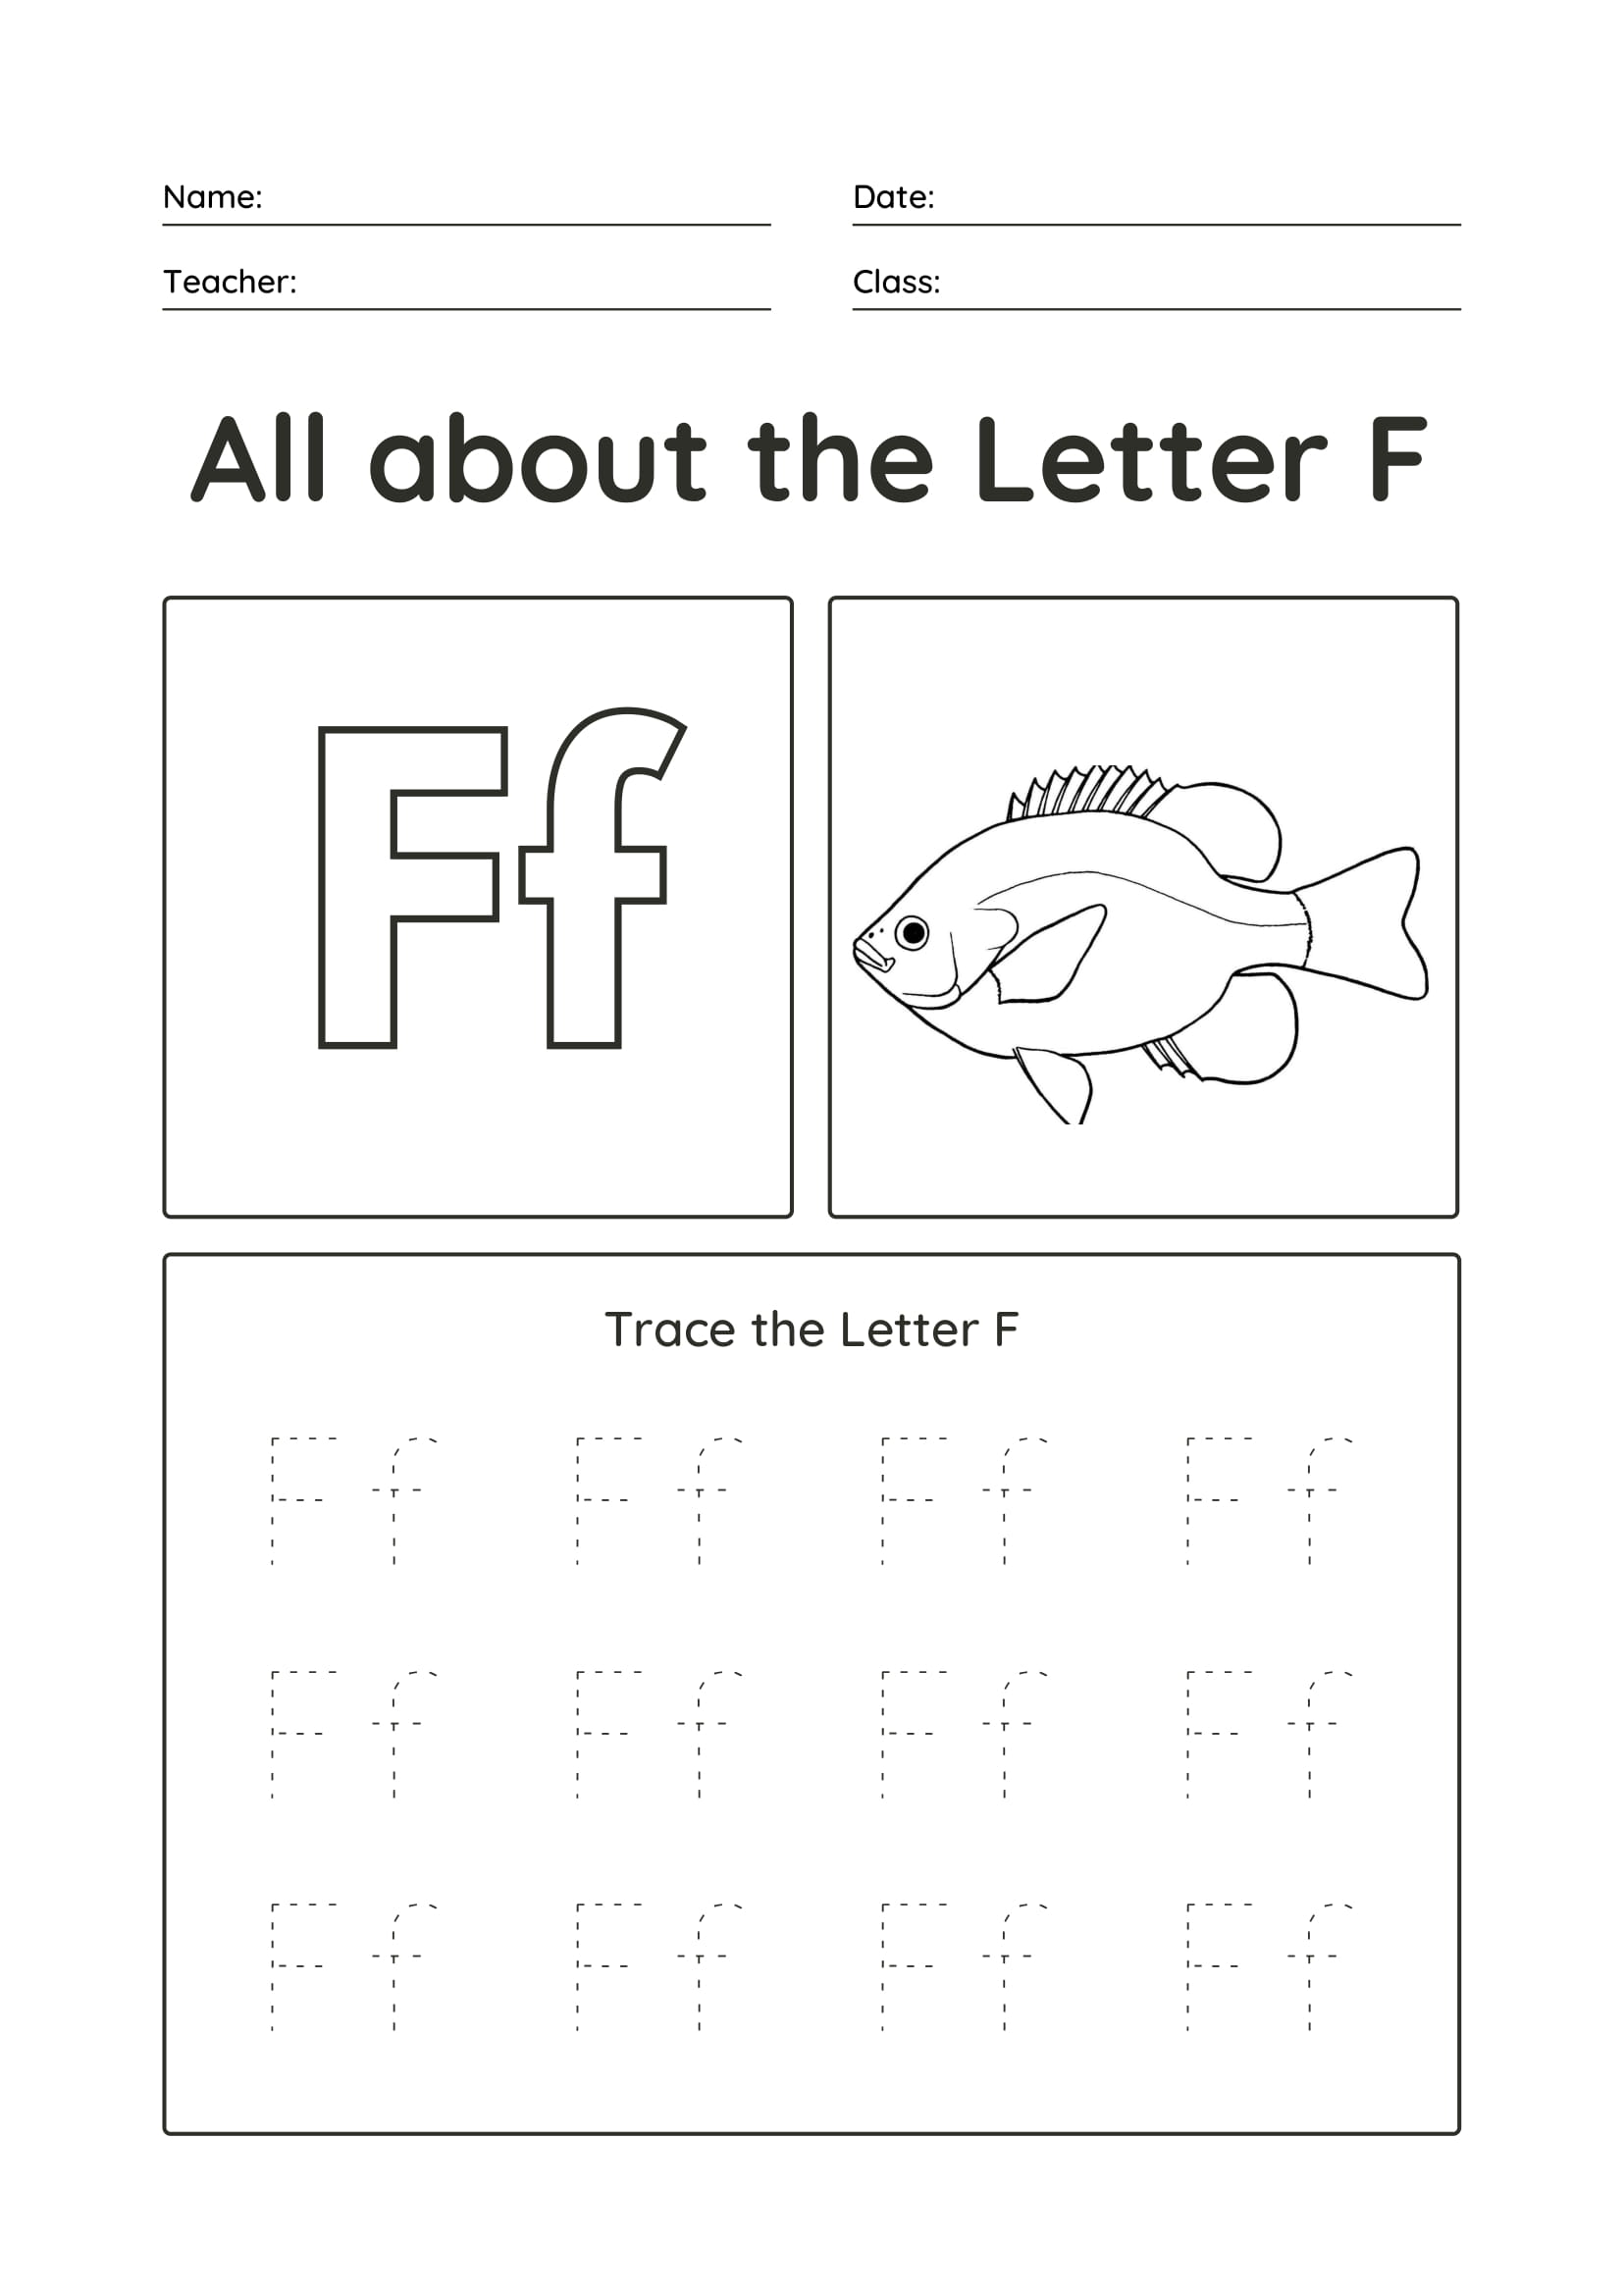 lowercase-letter-f-tracing-worksheets-trace-small-letter-f-worksheet-trace-lowercase-letter-f